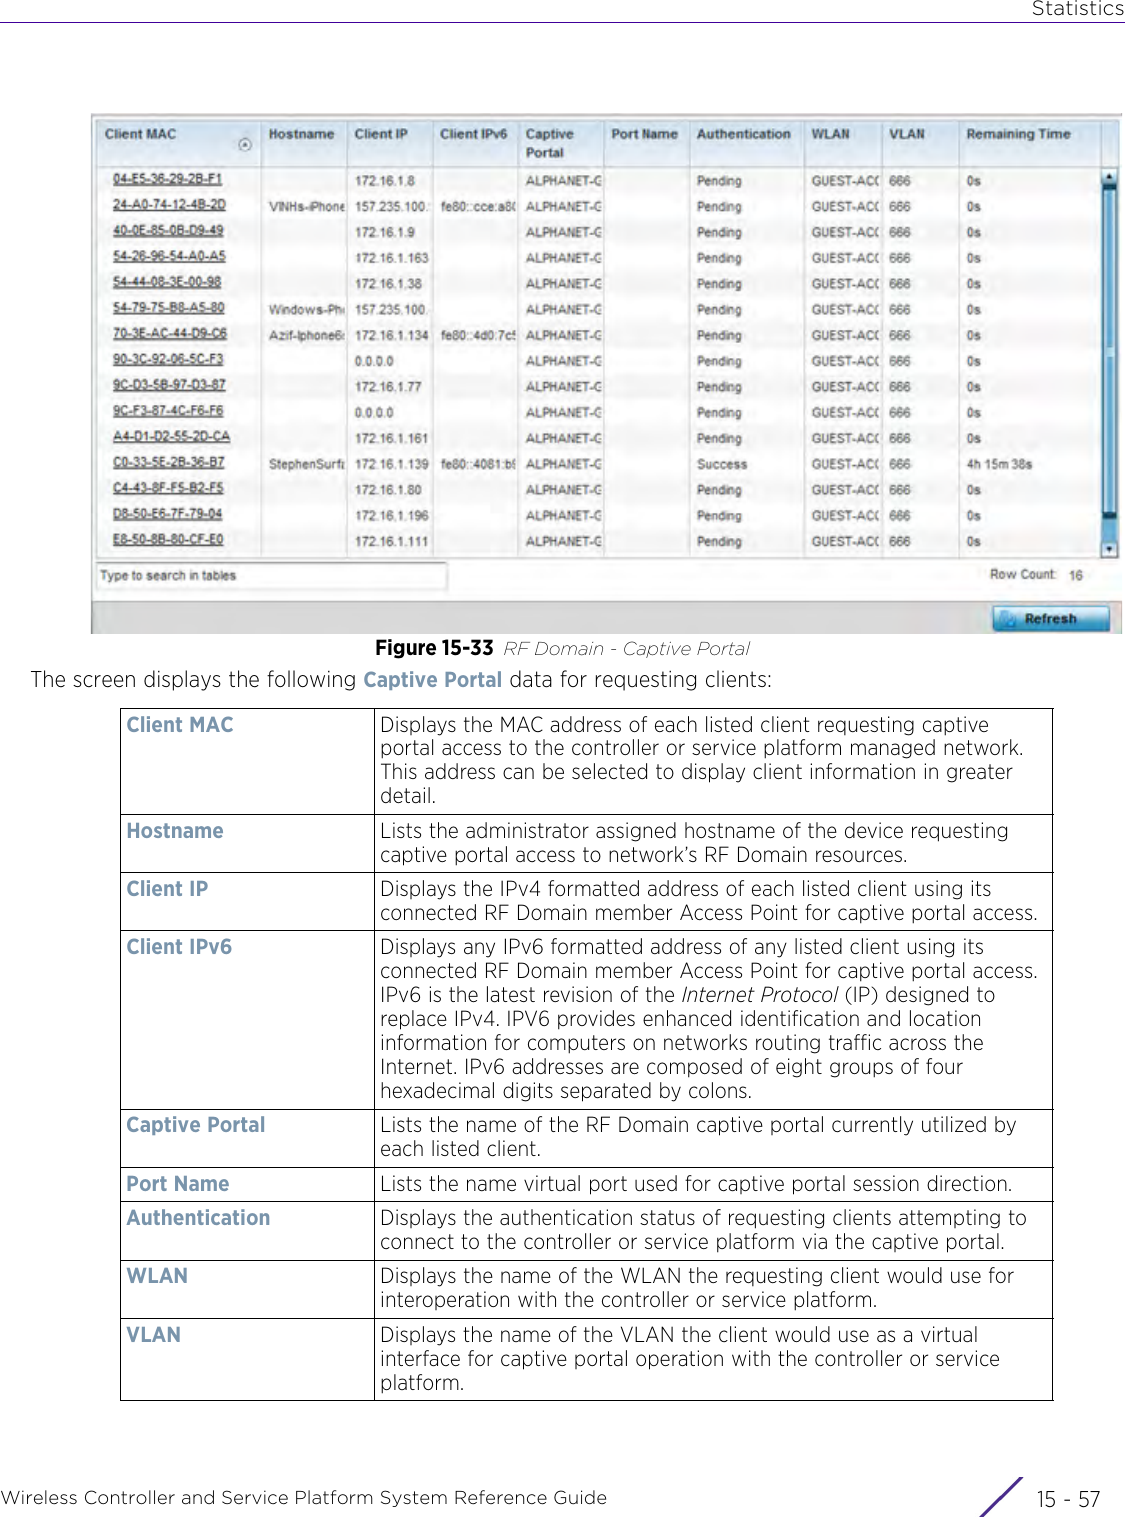 StatisticsWireless Controller and Service Platform System Reference Guide 15 - 57Figure 15-33 RF Domain - Captive PortalThe screen displays the following Captive Portal data for requesting clients:Client MAC Displays the MAC address of each listed client requesting captive portal access to the controller or service platform managed network. This address can be selected to display client information in greater detail.Hostname Lists the administrator assigned hostname of the device requesting captive portal access to network’s RF Domain resources.Client IP Displays the IPv4 formatted address of each listed client using its connected RF Domain member Access Point for captive portal access.Client IPv6 Displays any IPv6 formatted address of any listed client using its connected RF Domain member Access Point for captive portal access. IPv6 is the latest revision of the Internet Protocol (IP) designed to replace IPv4. IPV6 provides enhanced identification and location information for computers on networks routing traffic across the Internet. IPv6 addresses are composed of eight groups of four hexadecimal digits separated by colons.Captive Portal Lists the name of the RF Domain captive portal currently utilized by each listed client.Port Name Lists the name virtual port used for captive portal session direction.Authentication Displays the authentication status of requesting clients attempting to connect to the controller or service platform via the captive portal.WLAN Displays the name of the WLAN the requesting client would use for interoperation with the controller or service platform.VLAN Displays the name of the VLAN the client would use as a virtual interface for captive portal operation with the controller or service platform.